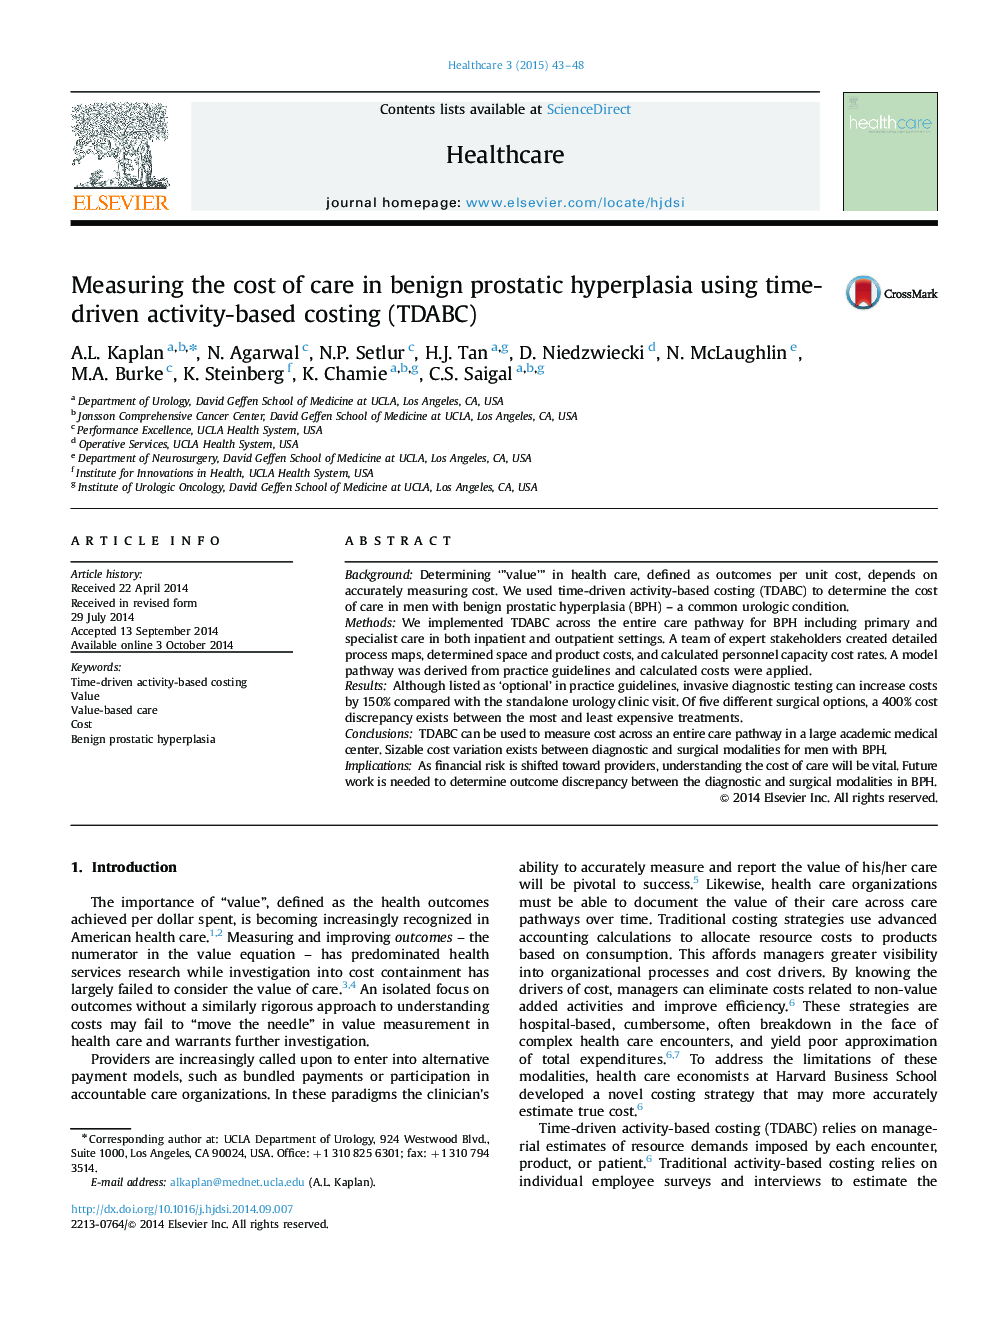 Measuring the cost of care in benign prostatic hyperplasia using time-driven activity-based costing (TDABC)